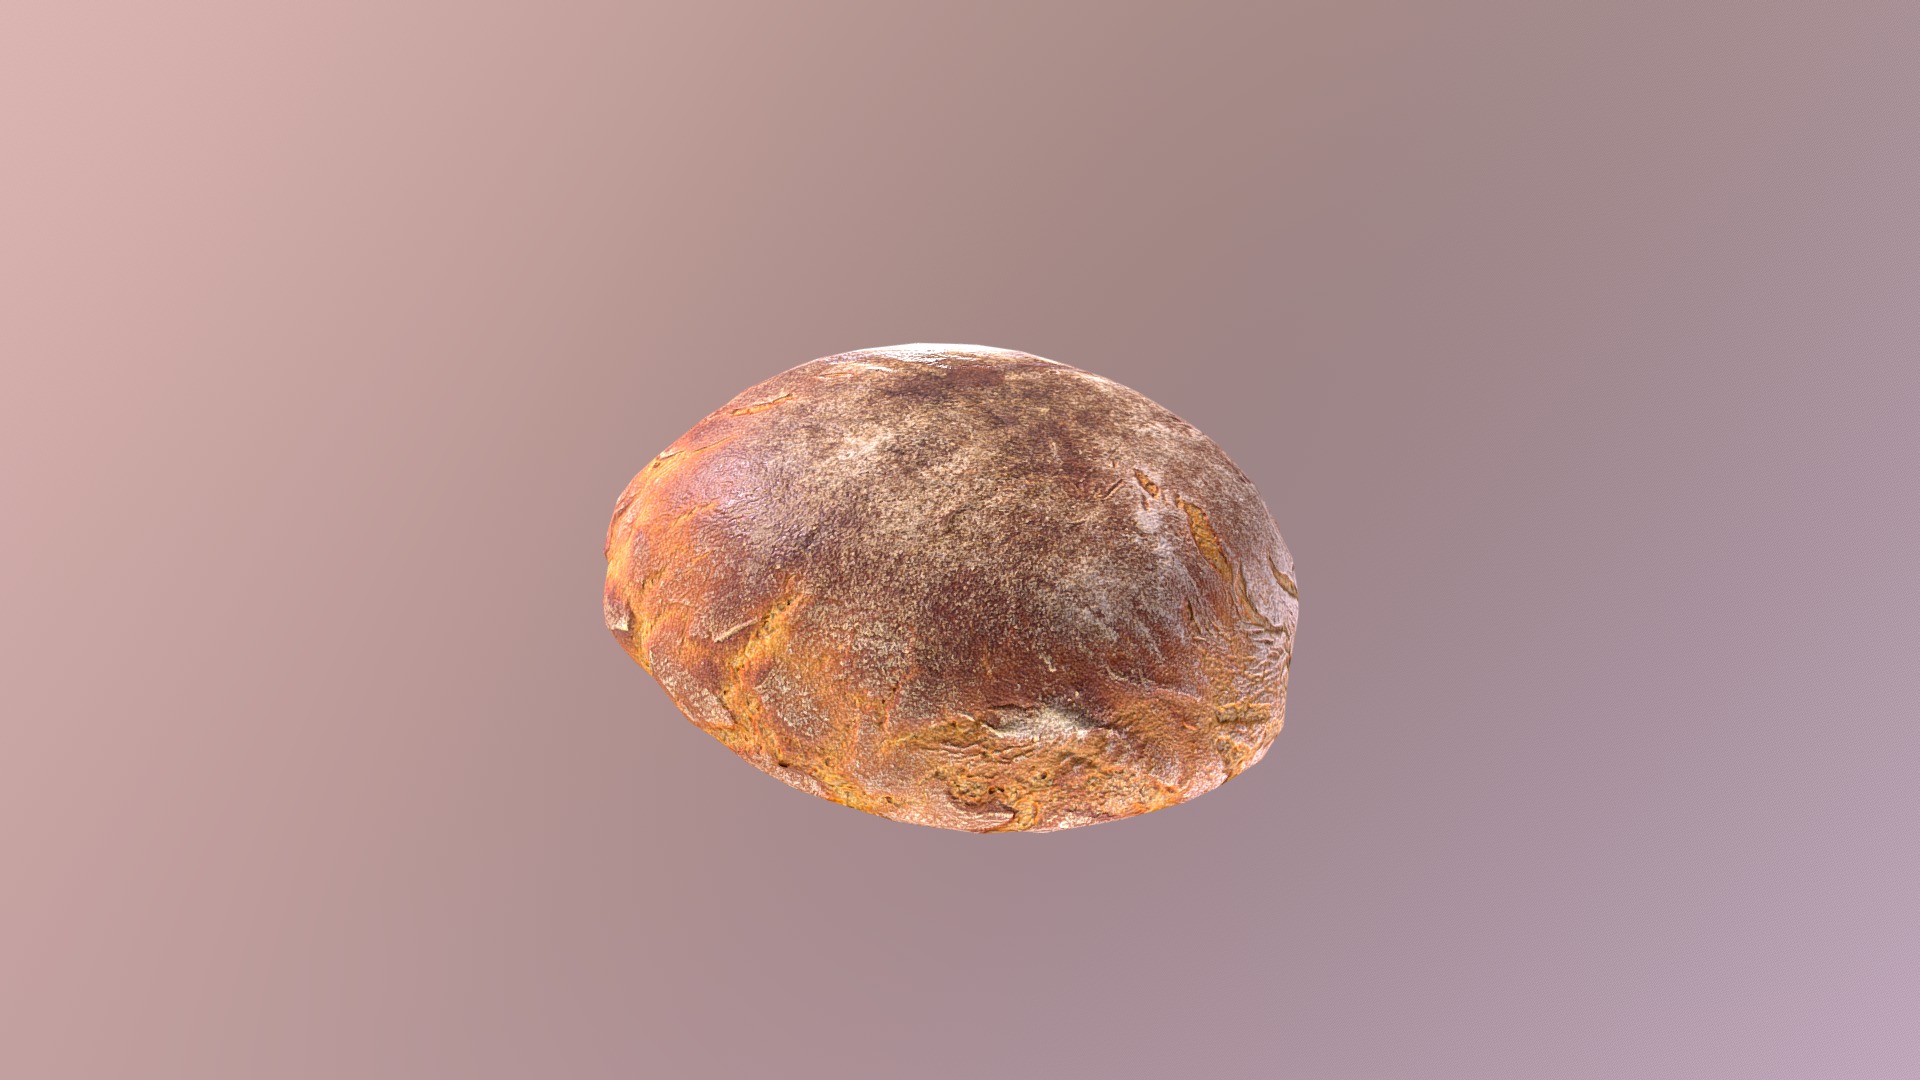 3D model TastyBreadPack vol.01 Model Two - This is a 3D model of the TastyBreadPack vol.01 Model Two. The 3D model is about a planet in space.